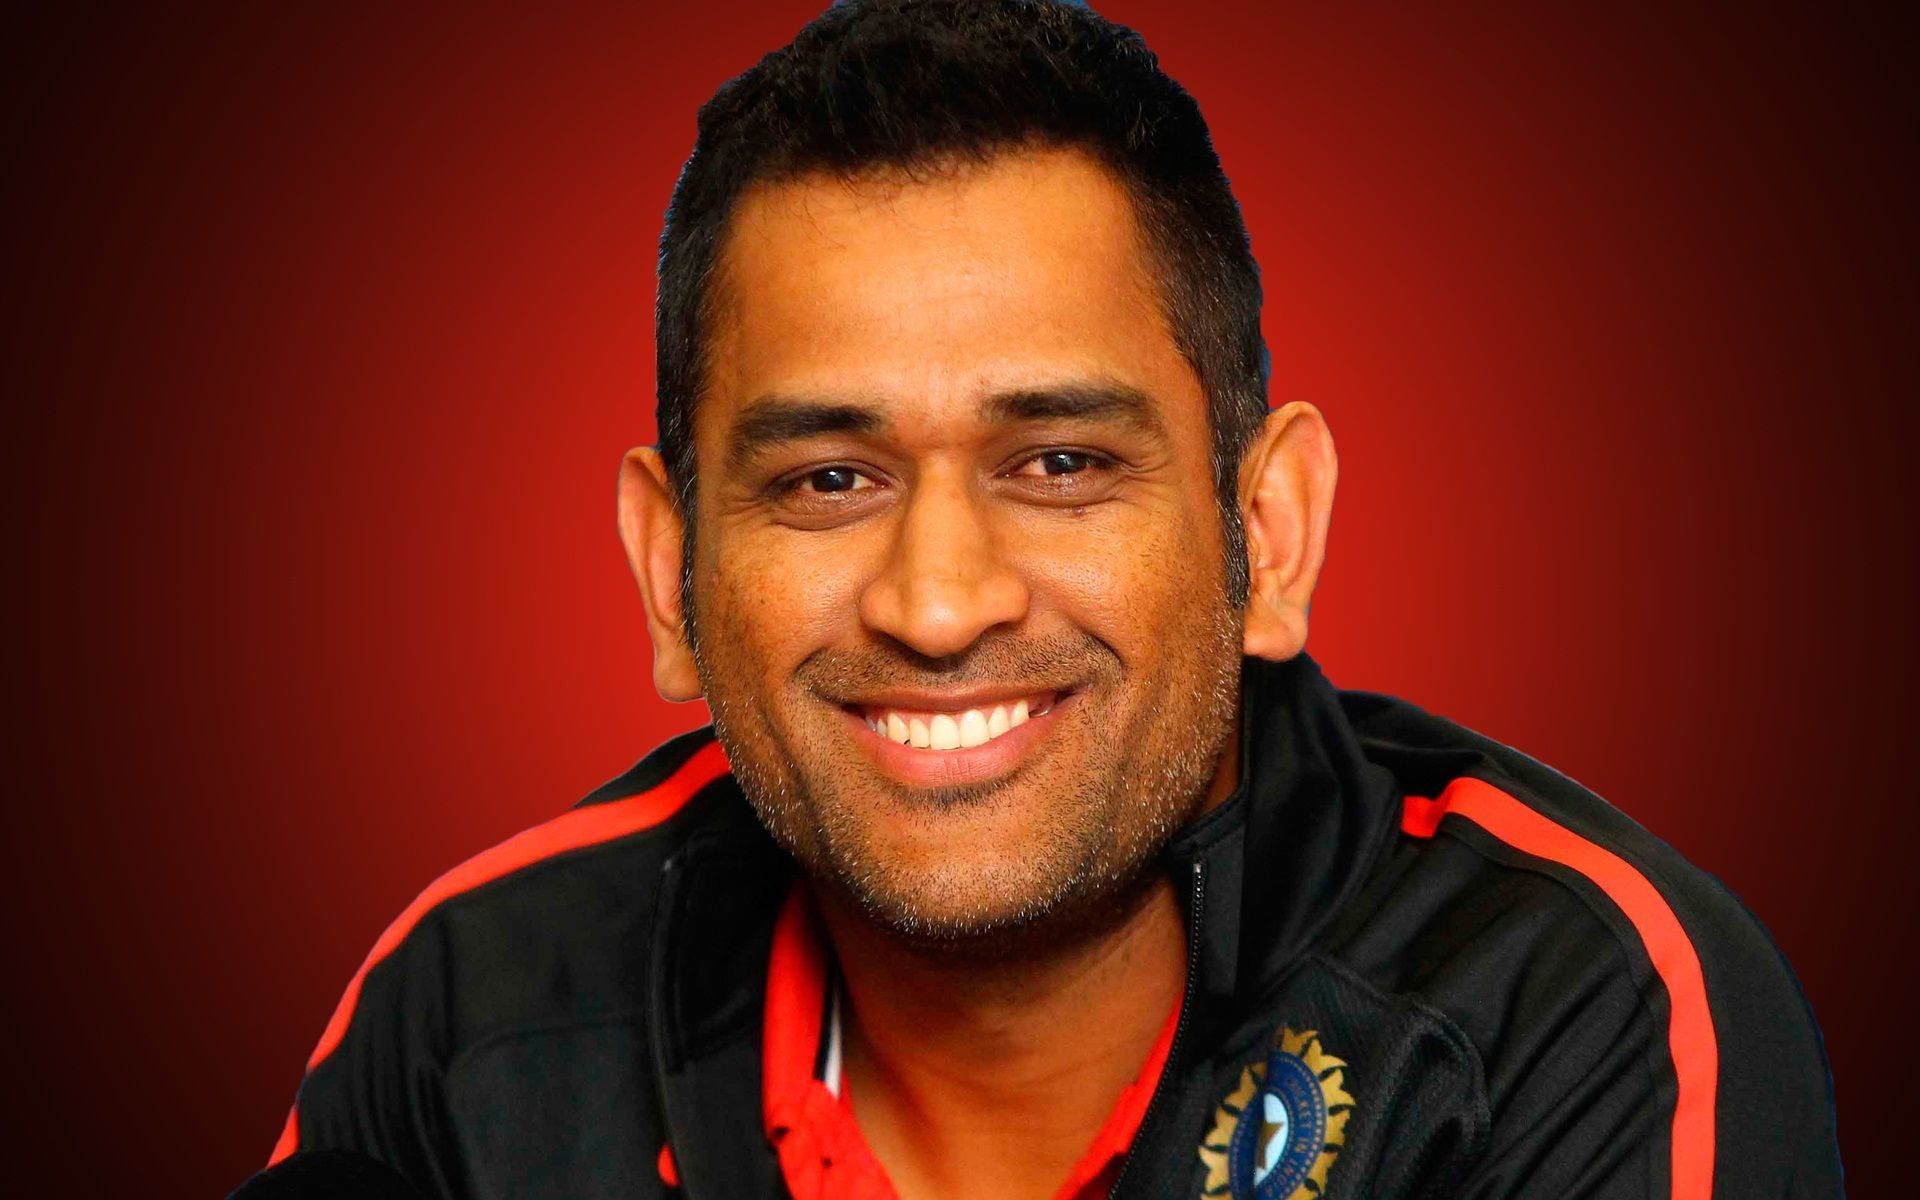 Ms Dhoni Wallpaper background picture